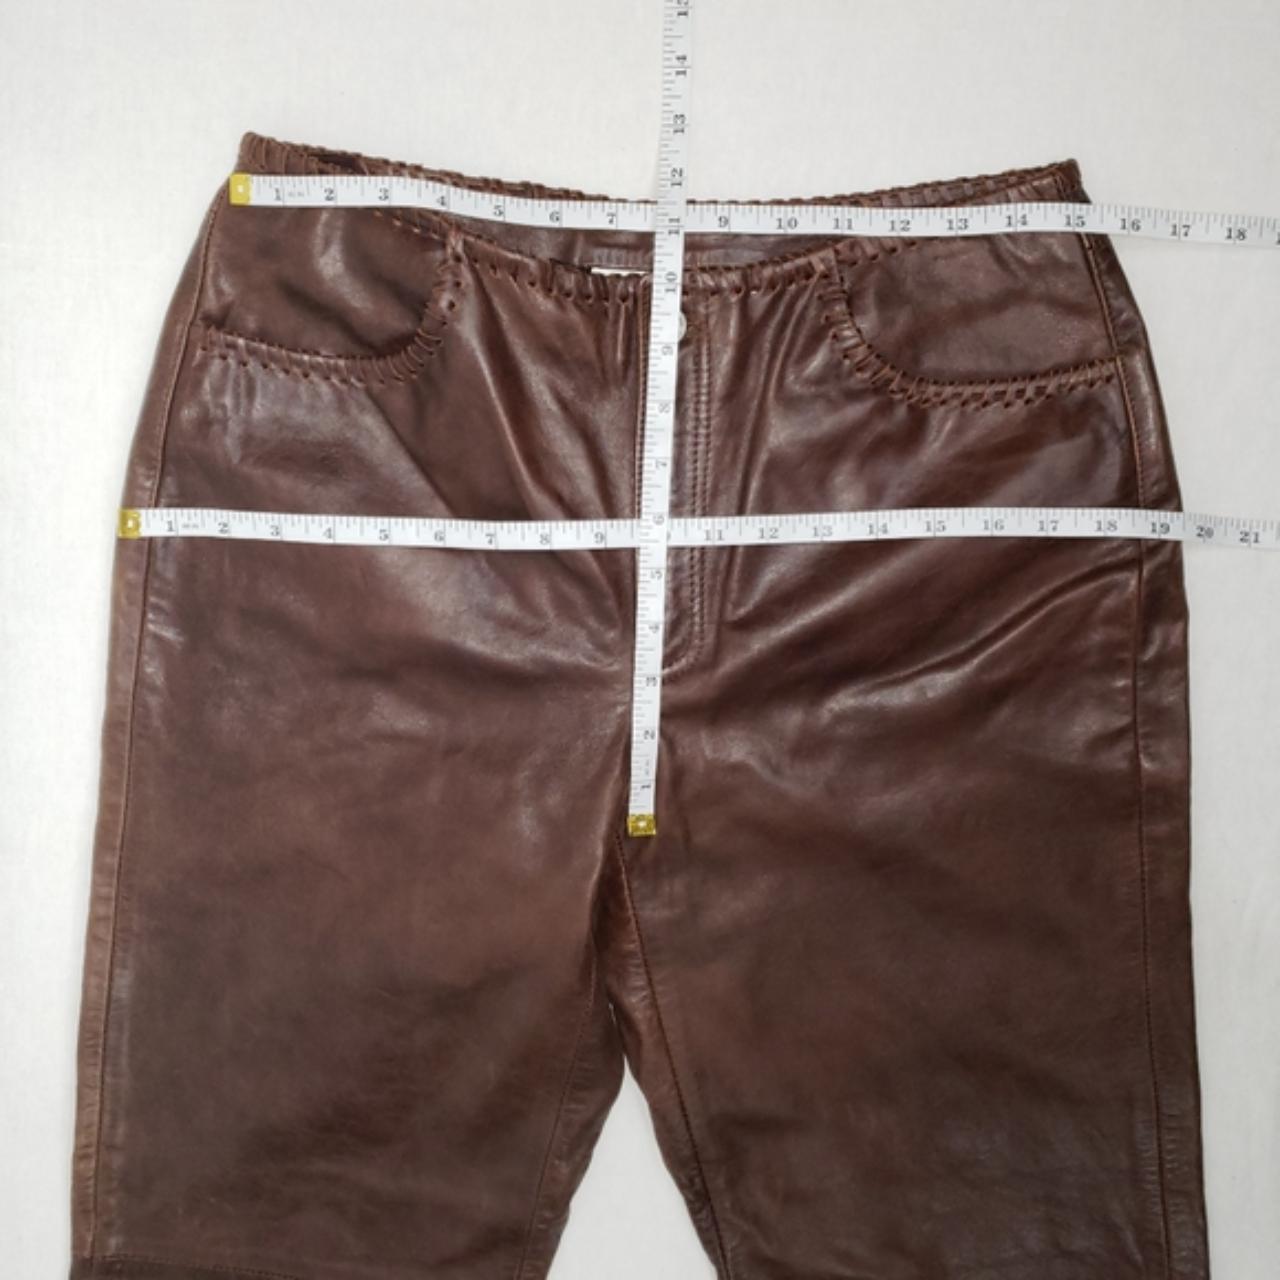 Cute brown leather pants by Liz Claiborne. Leather... - Depop